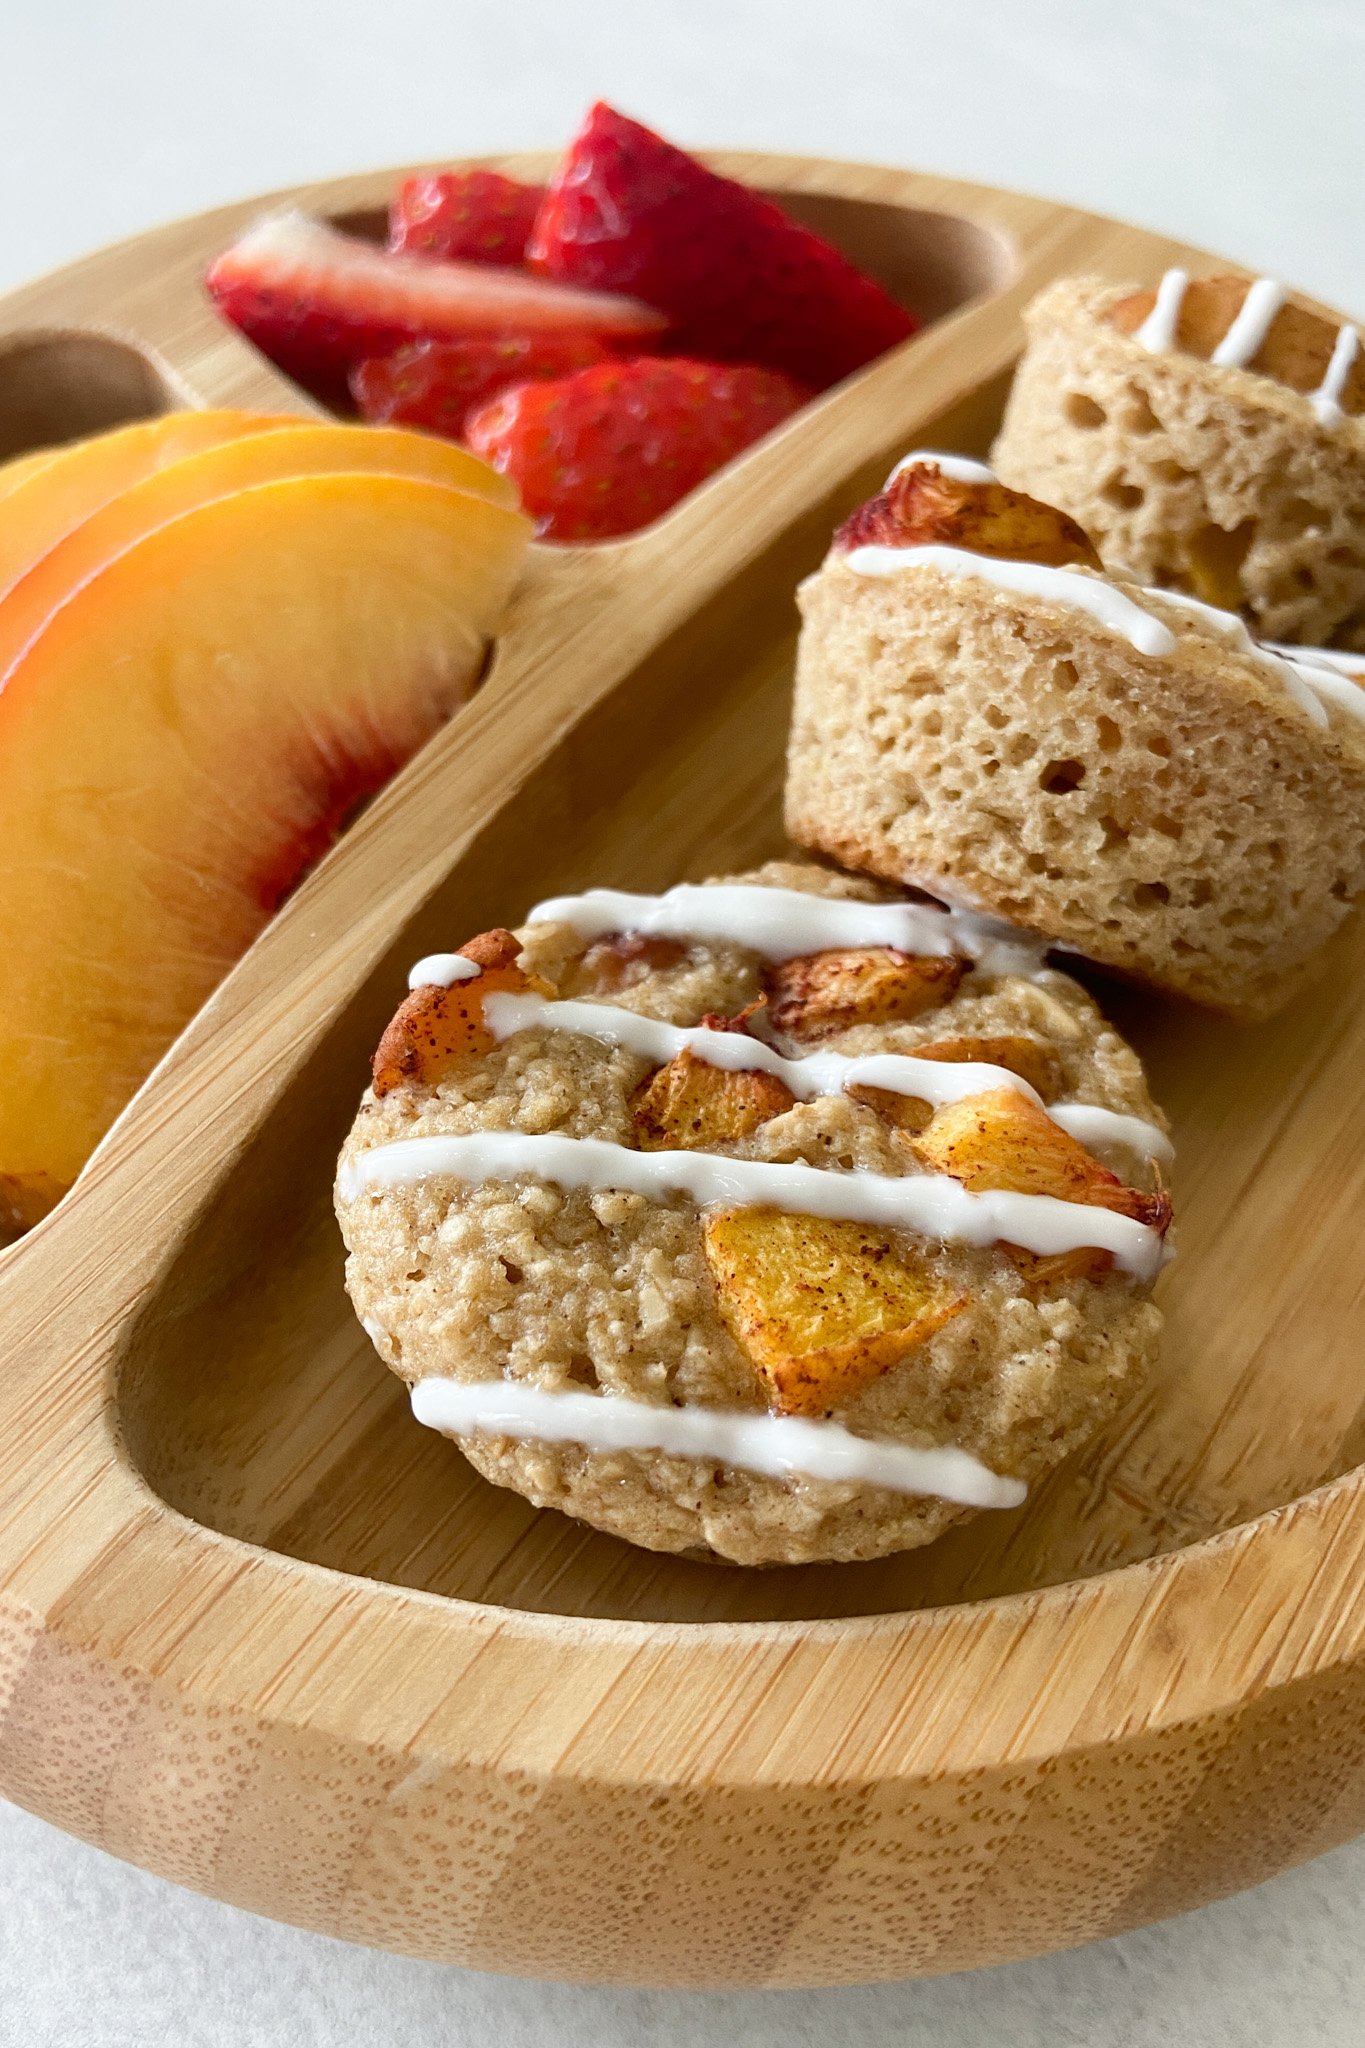 Peach cobbler muffins served with fruits.